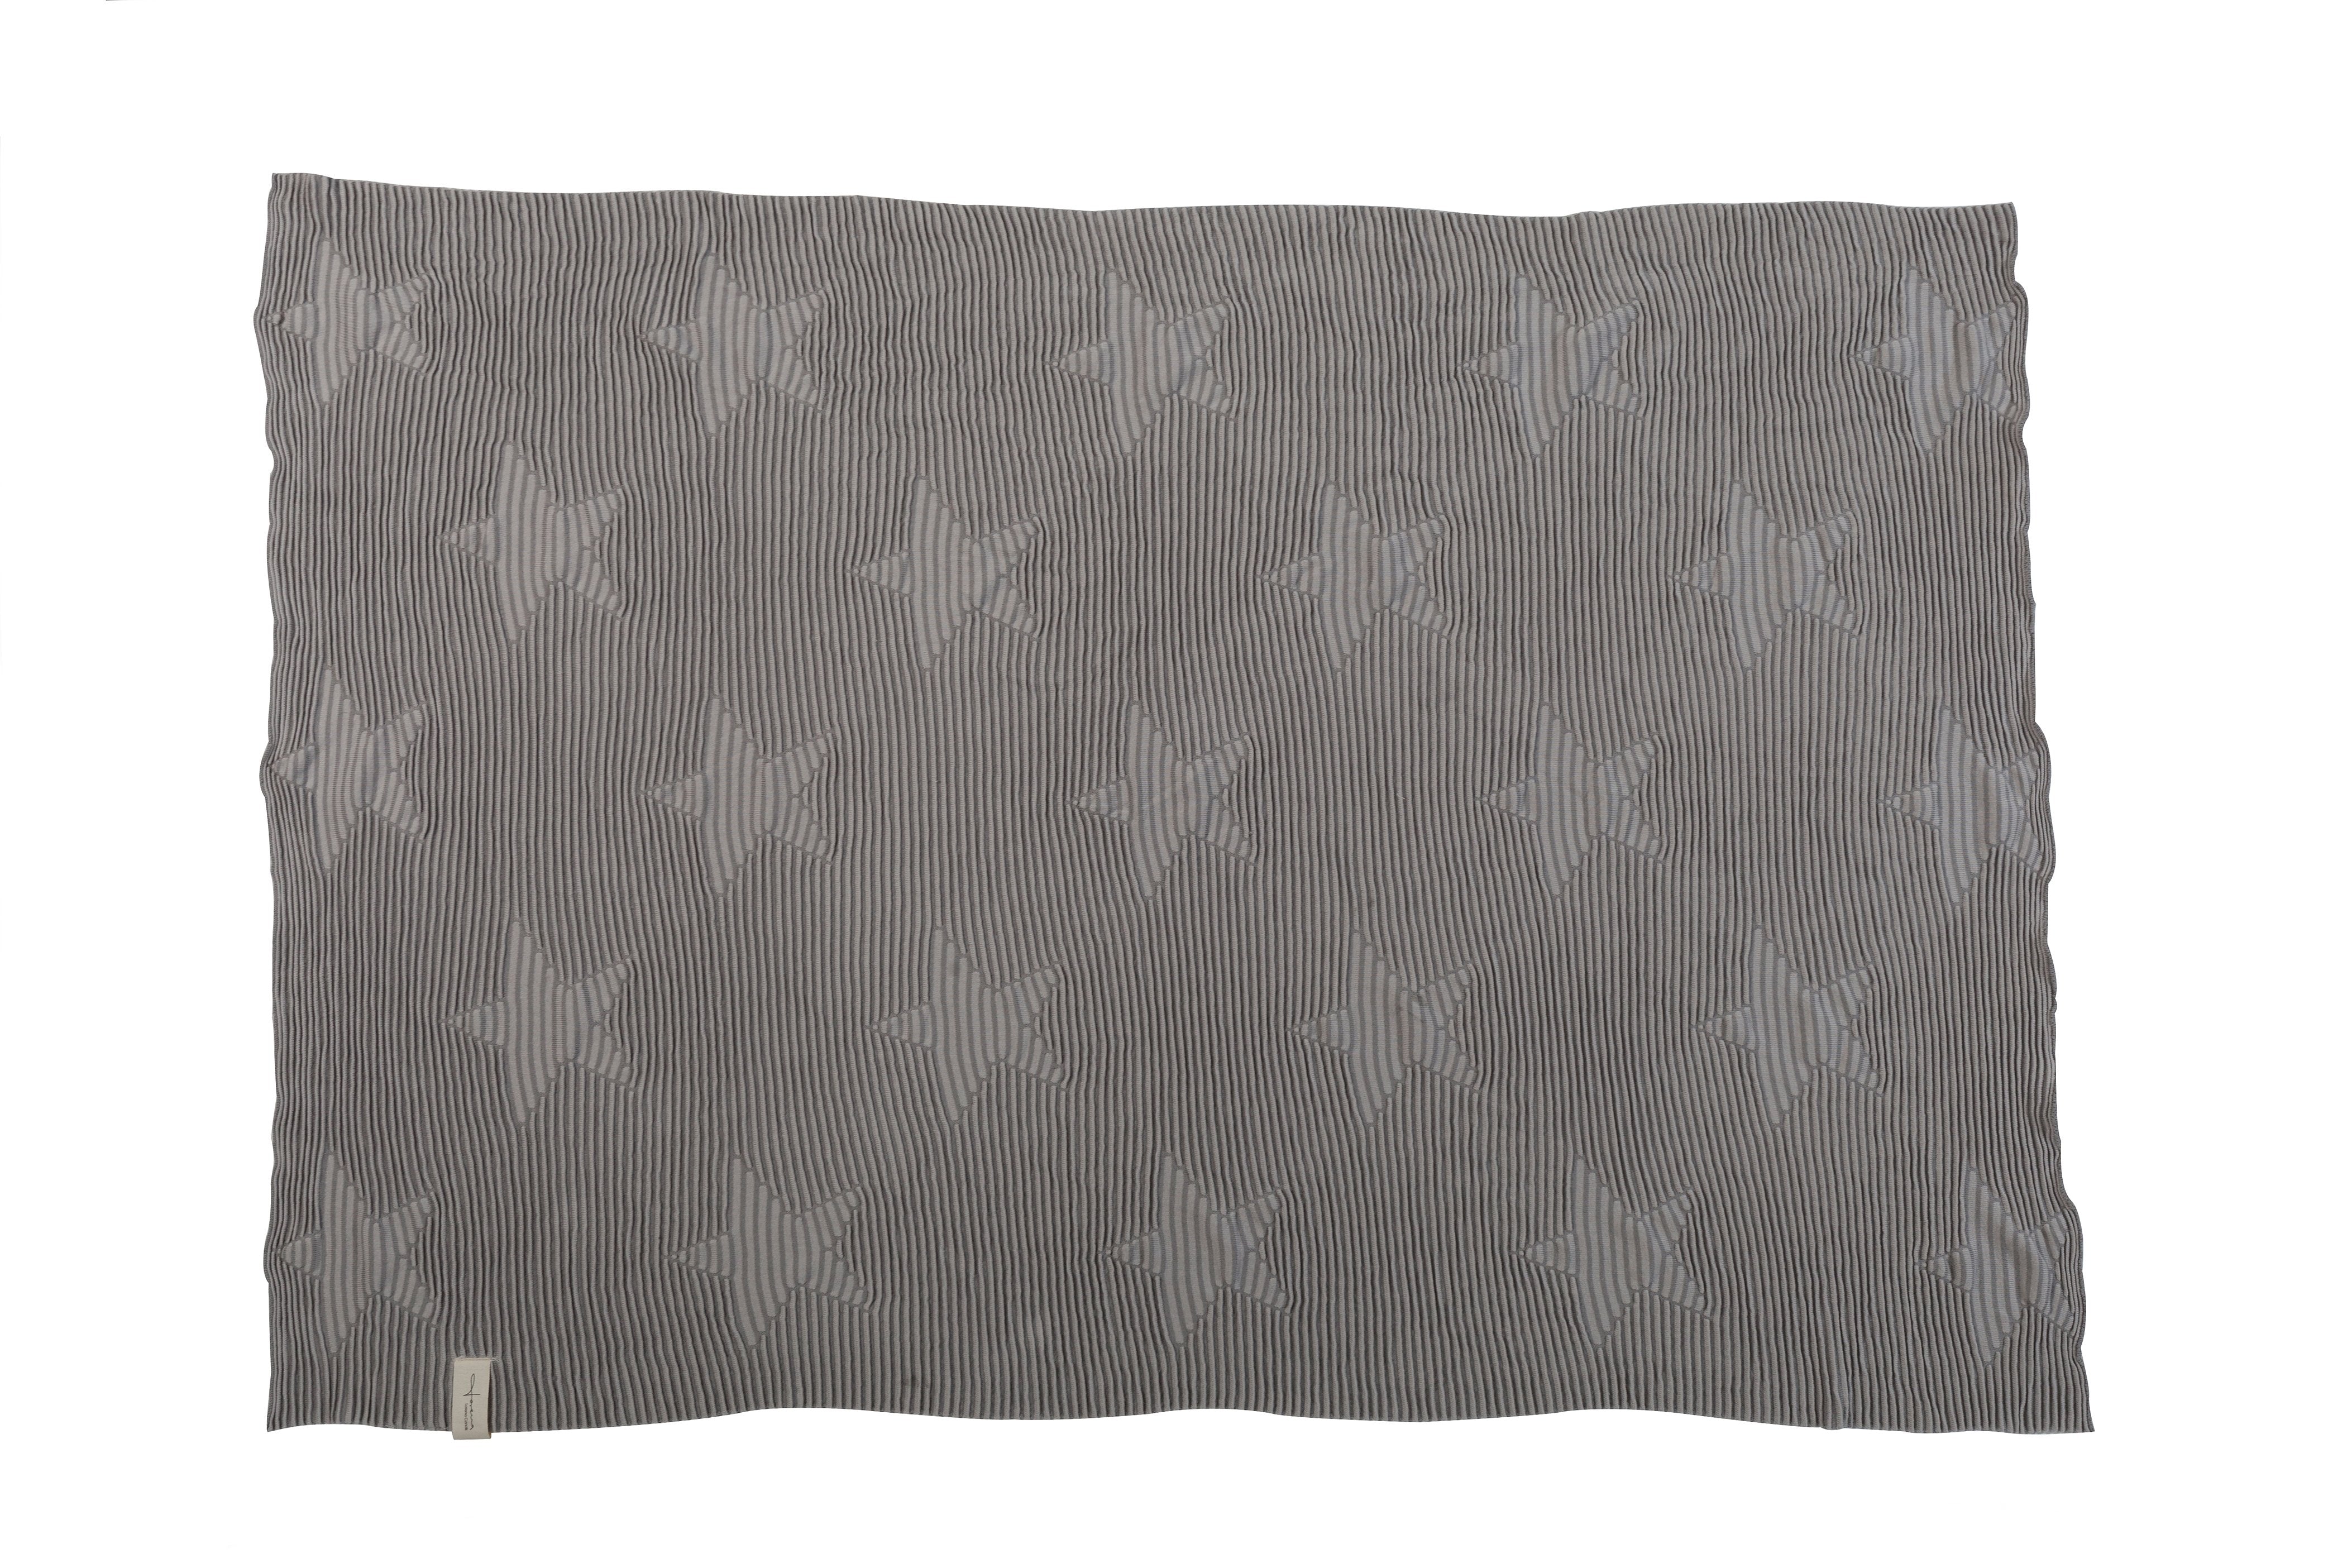 Knitted Hippy Stars Blanket in Pearl Grey design by Lorena Canals